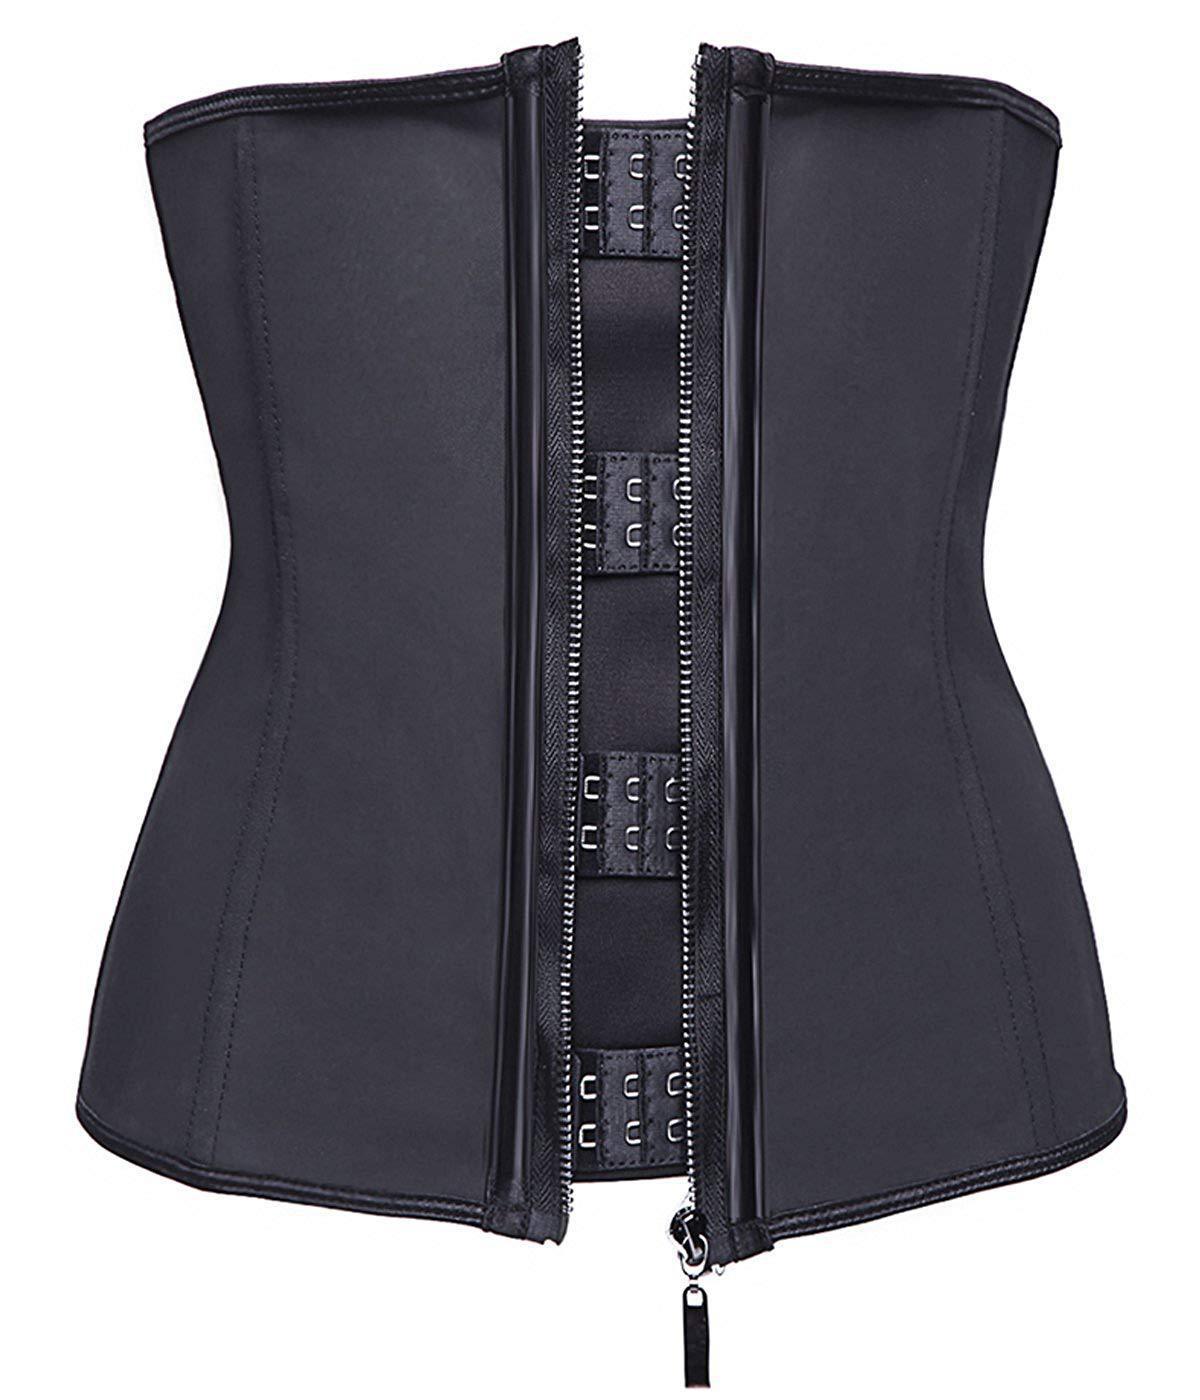 Court garment yoga adjustable belly in three rows button zipper of model body underwear with belt movement of corsets